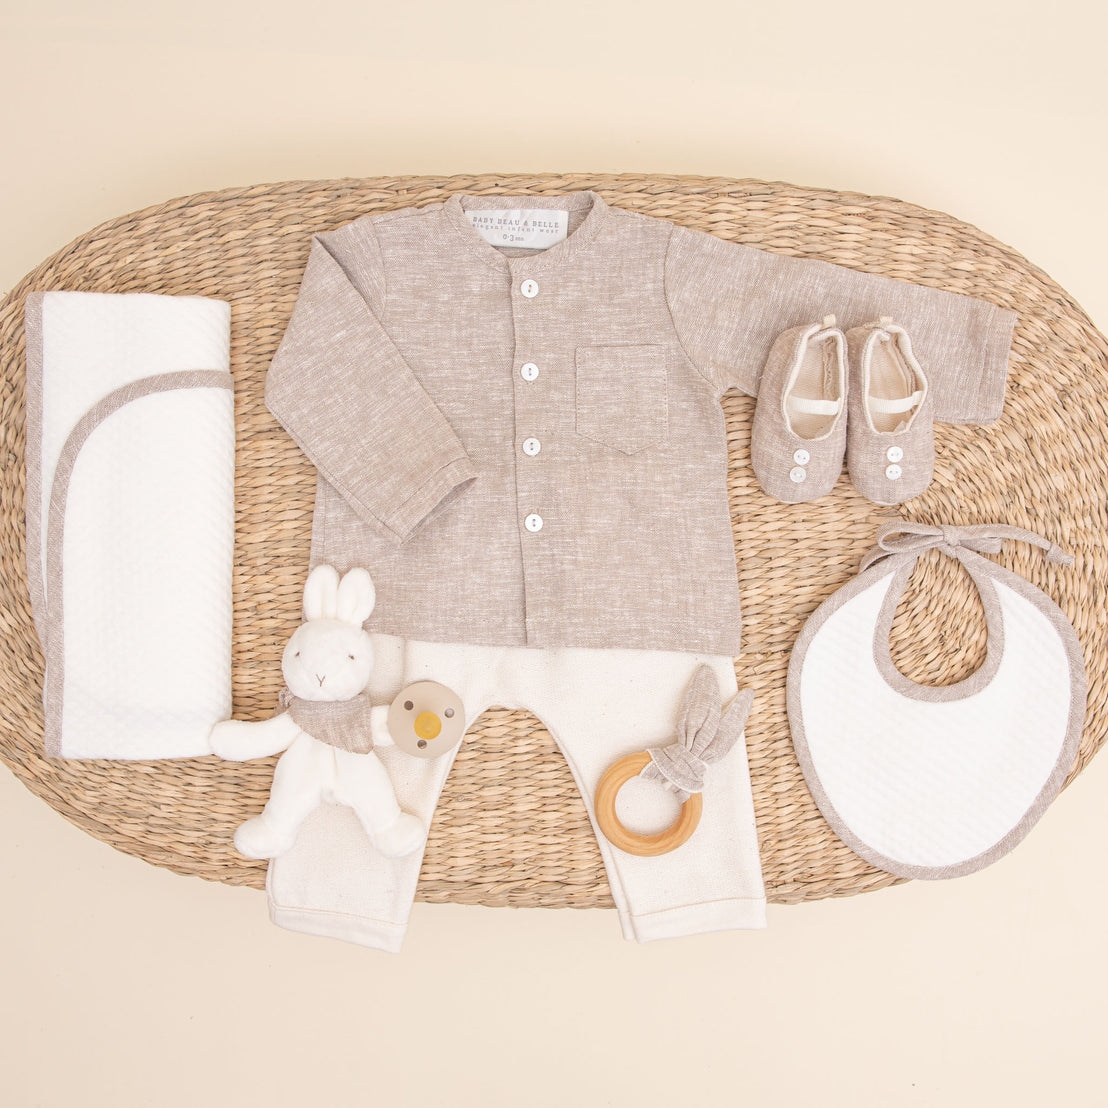 Flat lay photo of the sand colored Silas Gift Set. Included in the photo is the shirt, pants, booties, bib, teether, bunny, pacifier, and personalized blanket.